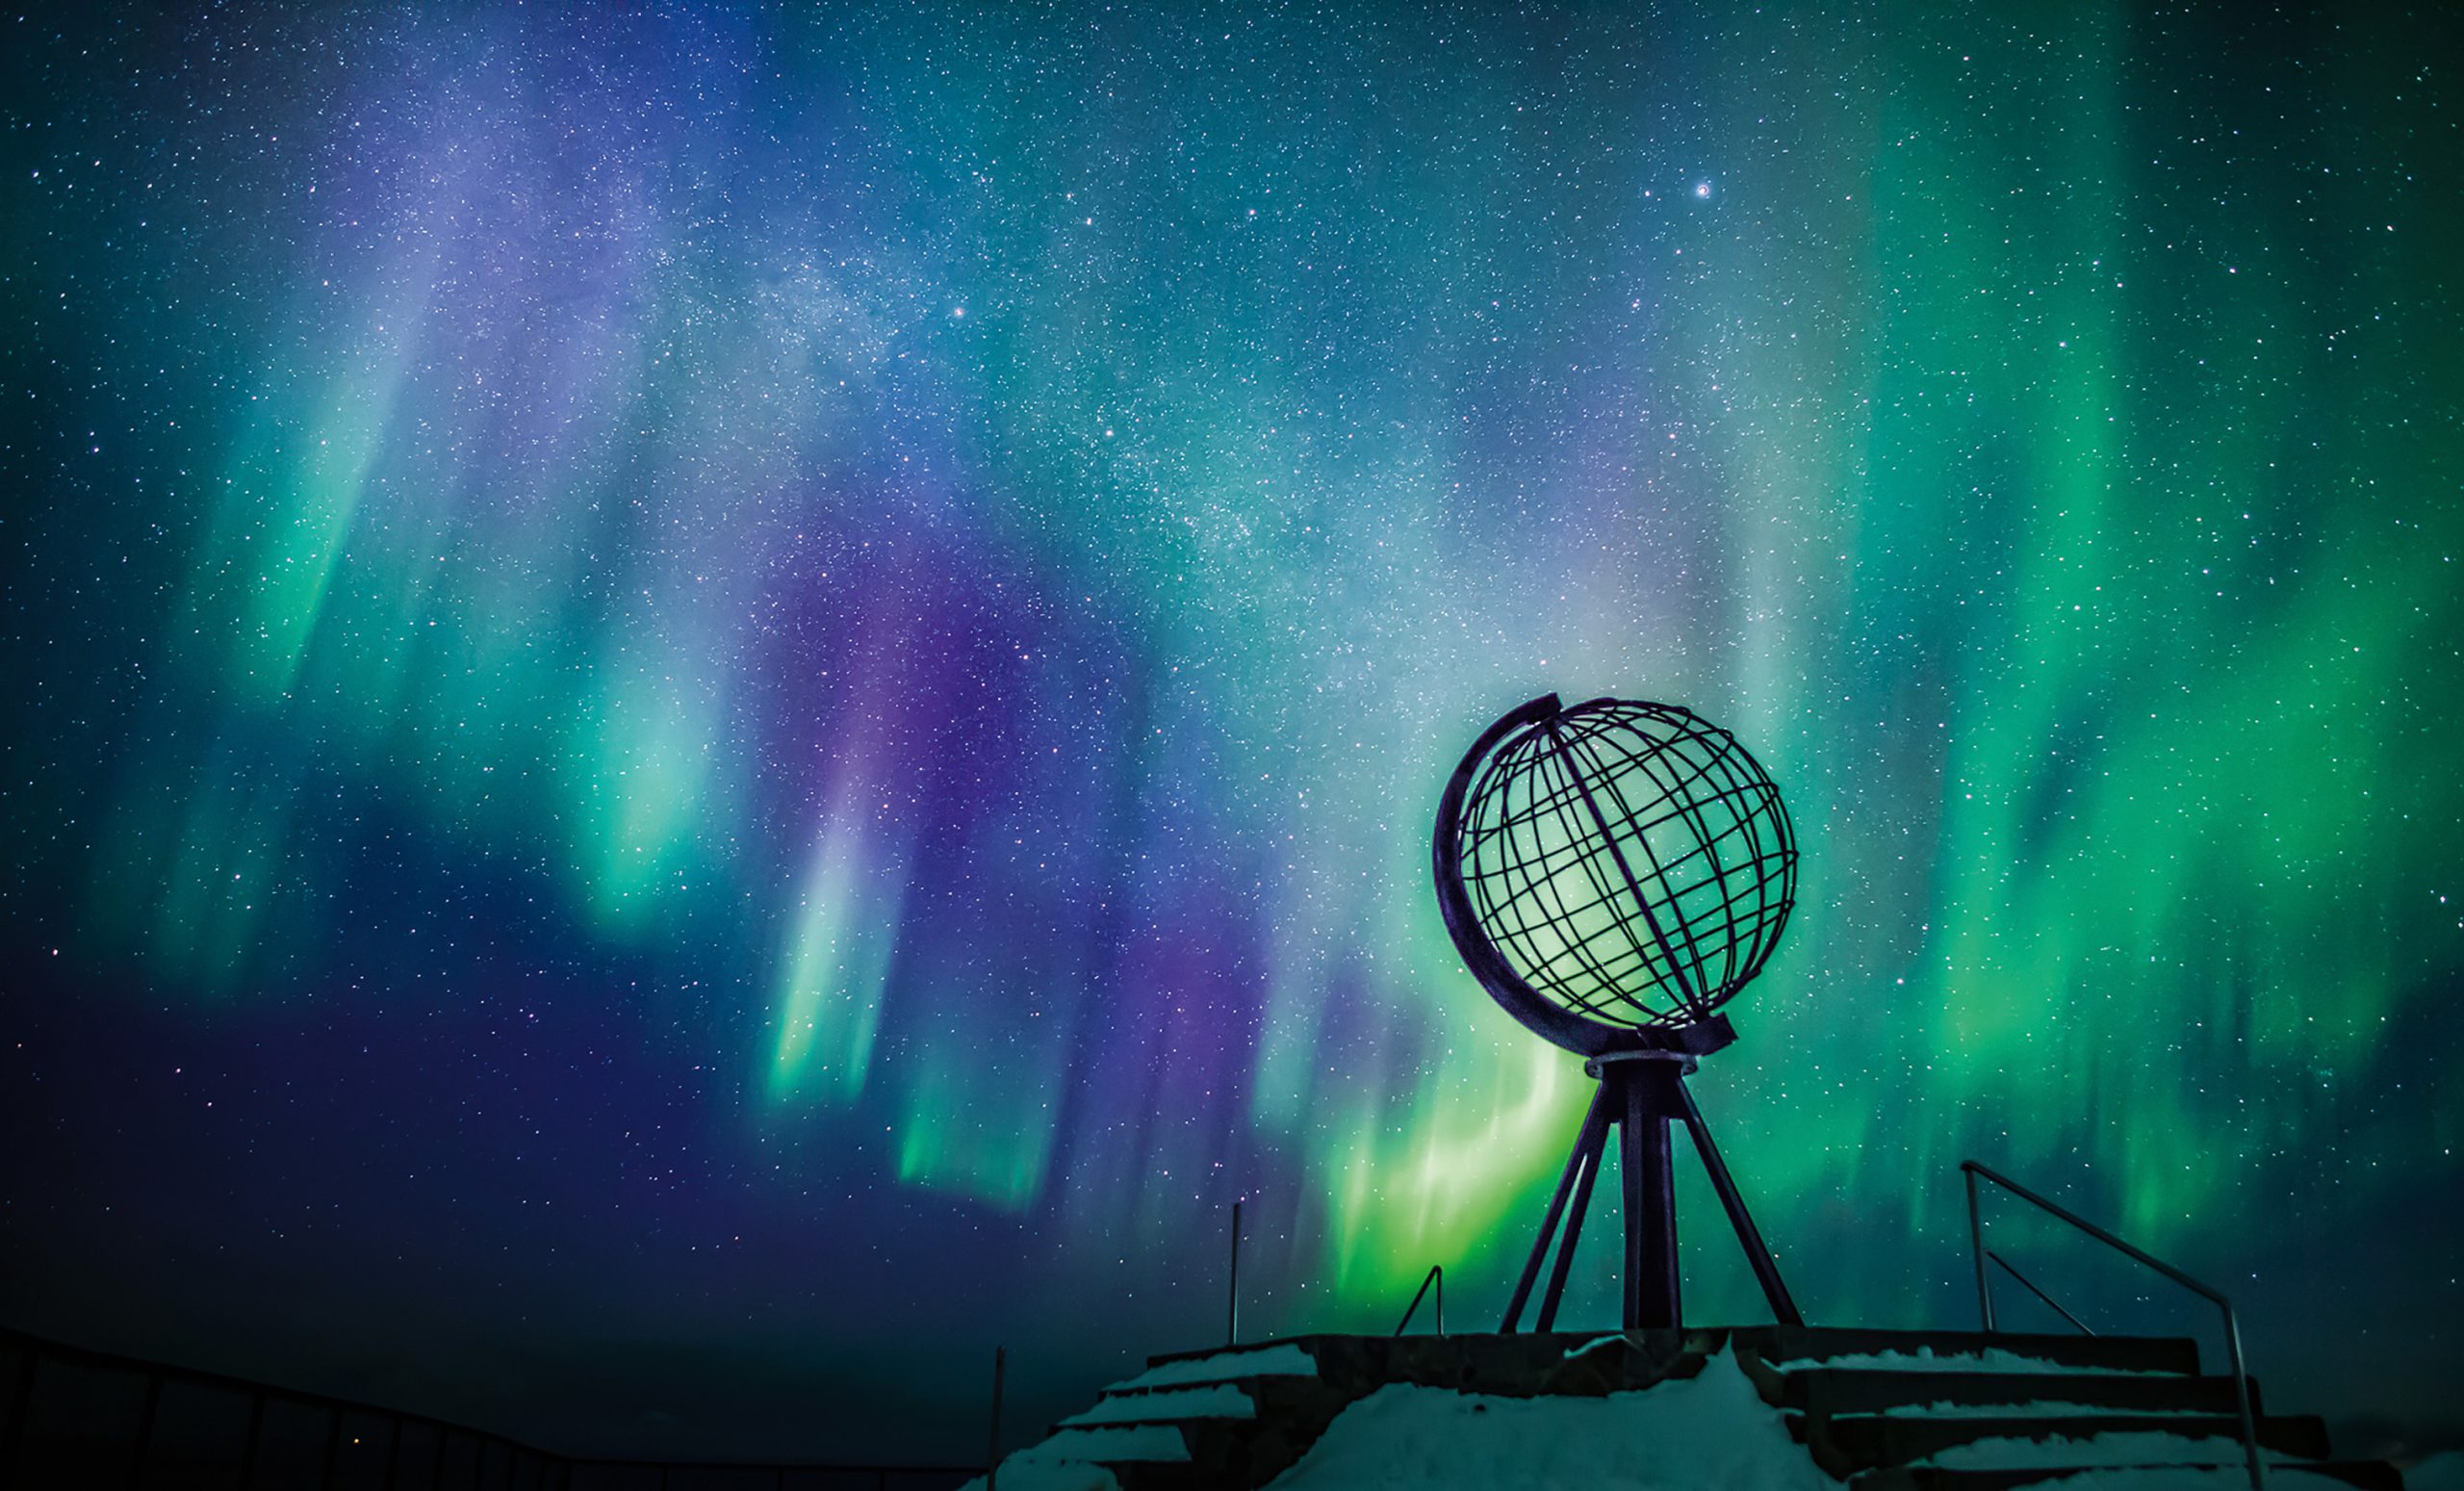 Follow in the footsteps of renowned astronomers with Hurtigruten Northern Lights voyage